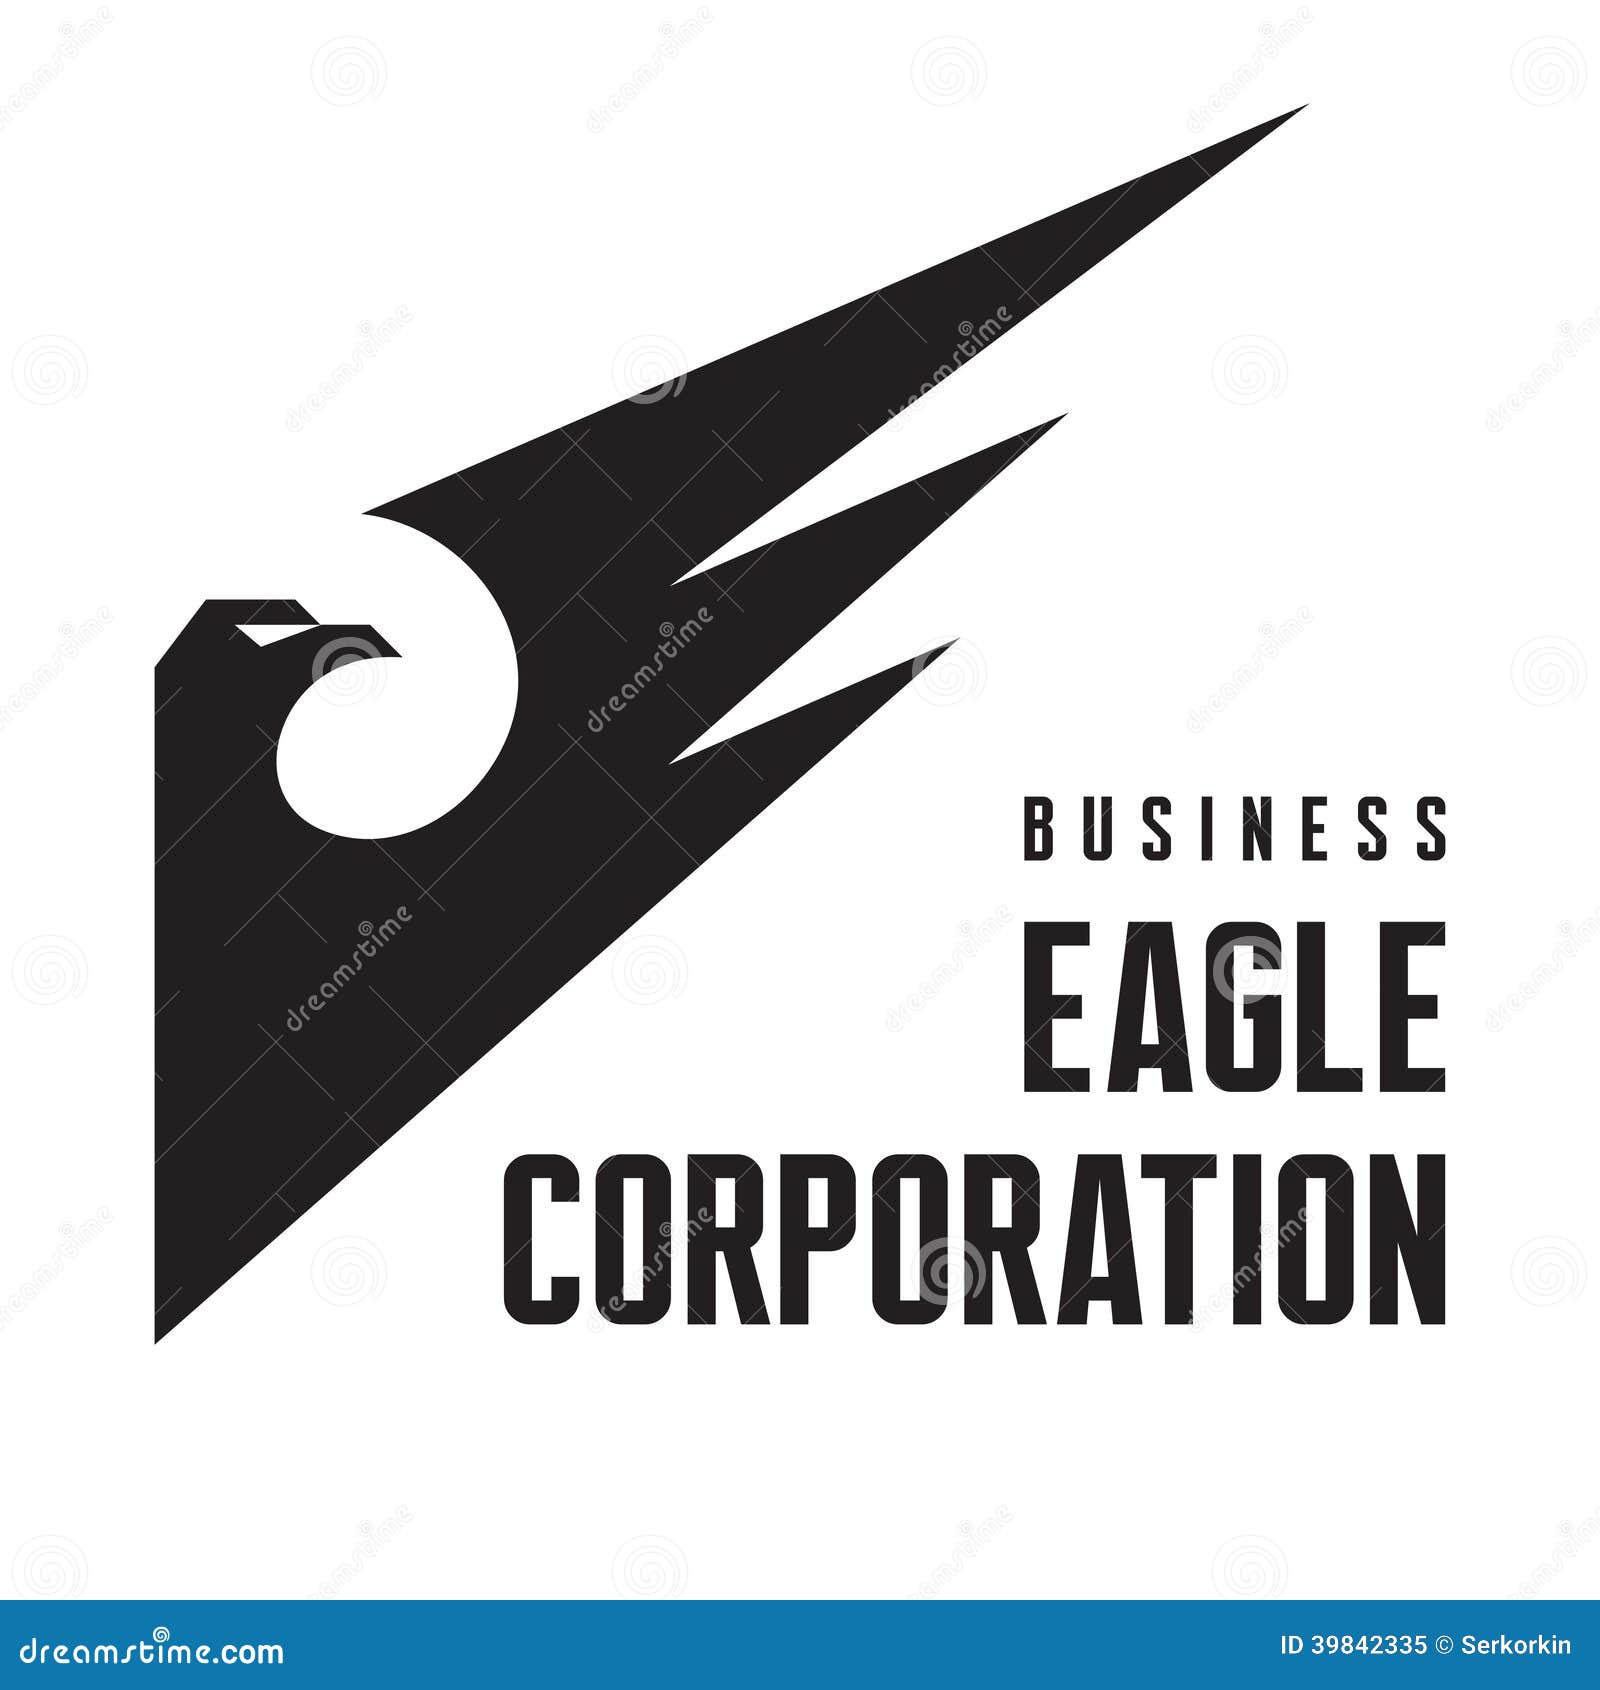 eagle corporation - logo sign for business company